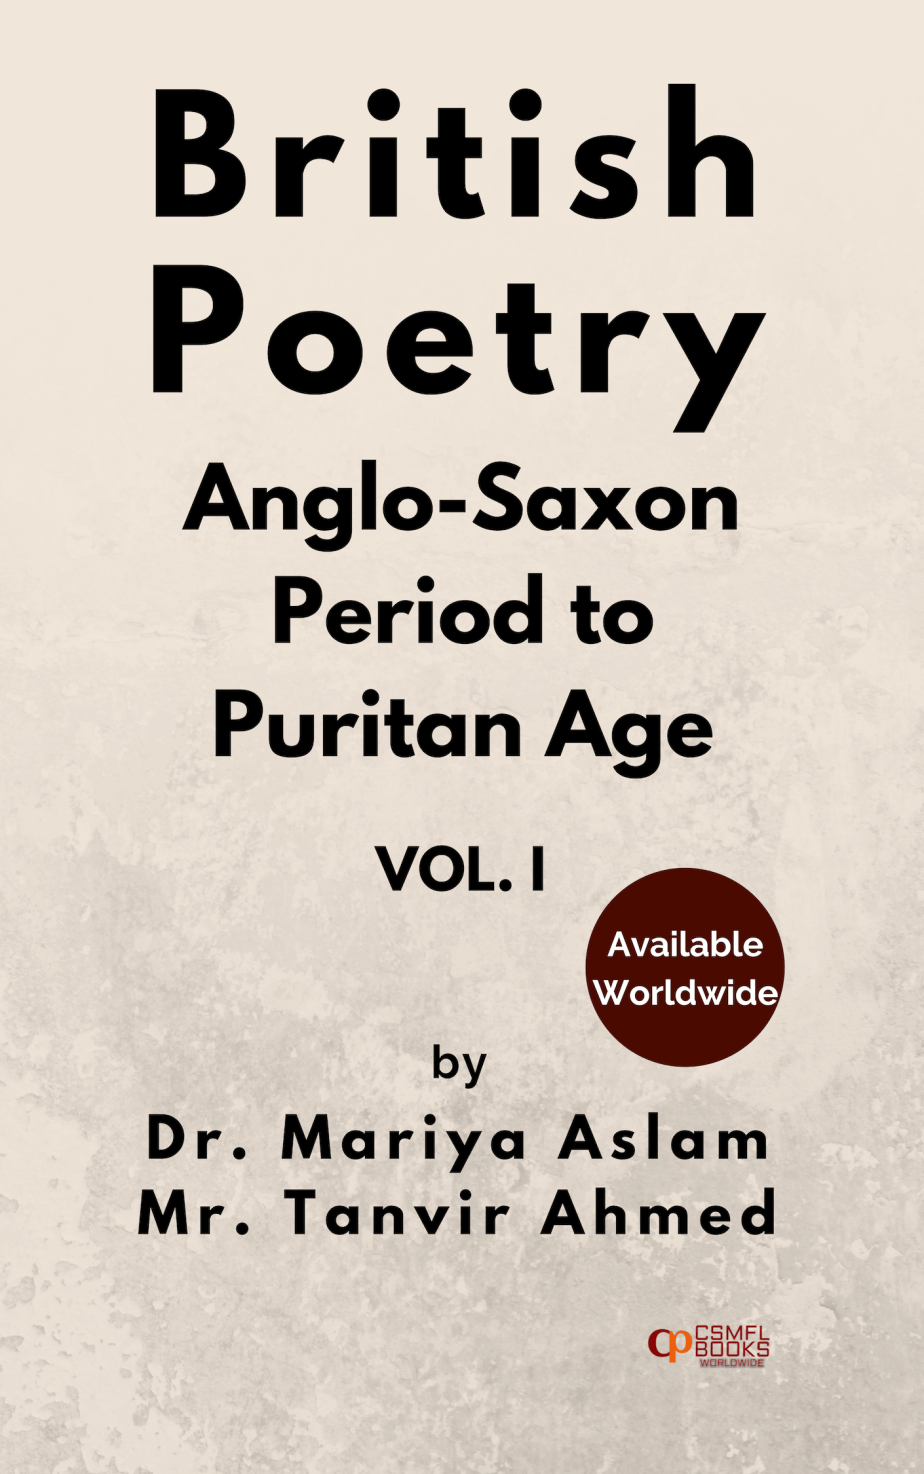 Book | BRITISH POETRY Anglo-Saxon Period to Puritan Age Vol-I | CSMFL Publications